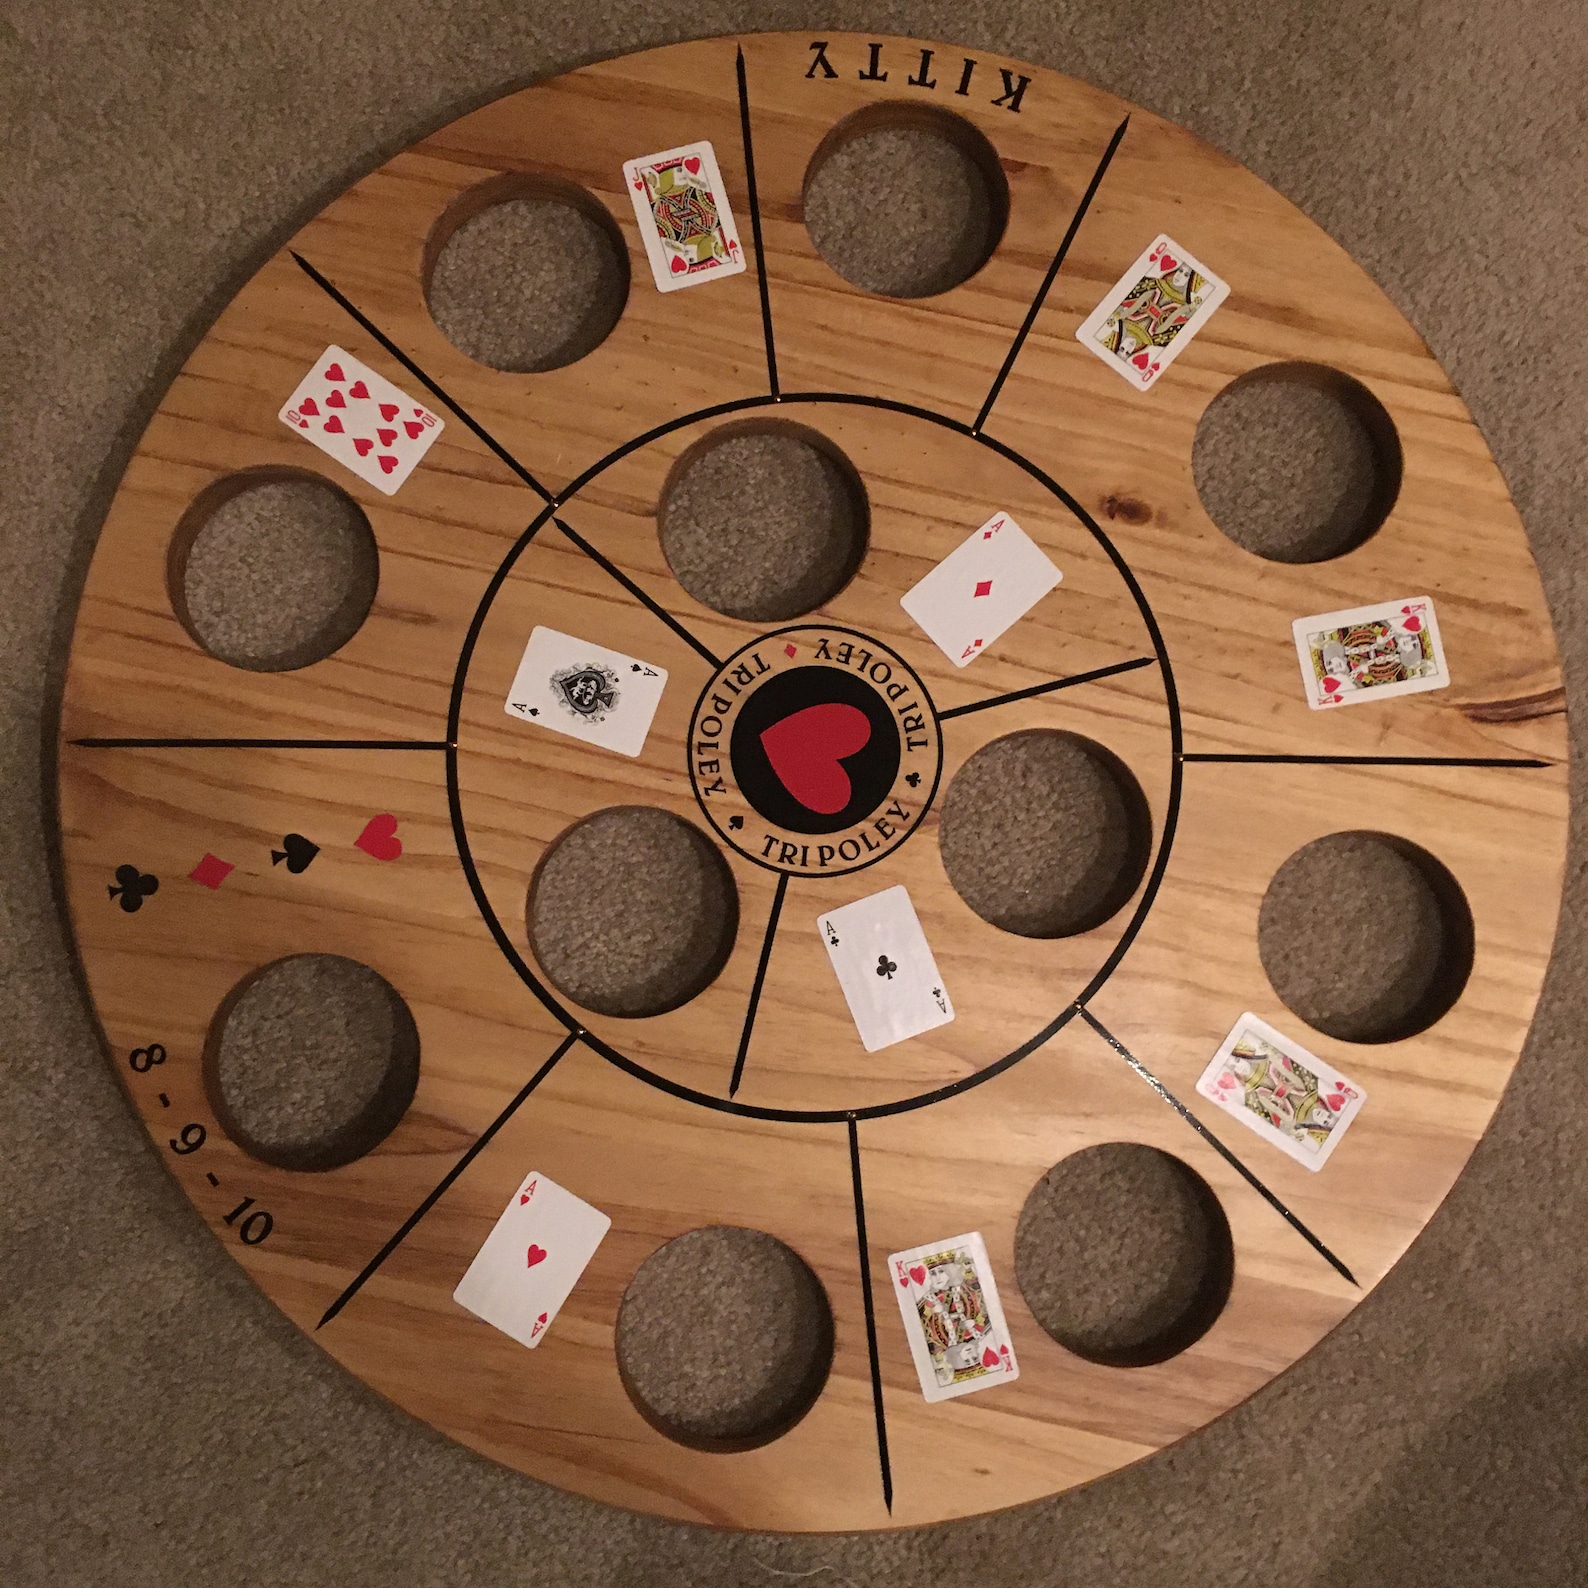 tripoley-game-board-11-holes-with-aces-hand-crafted-etsy-canada